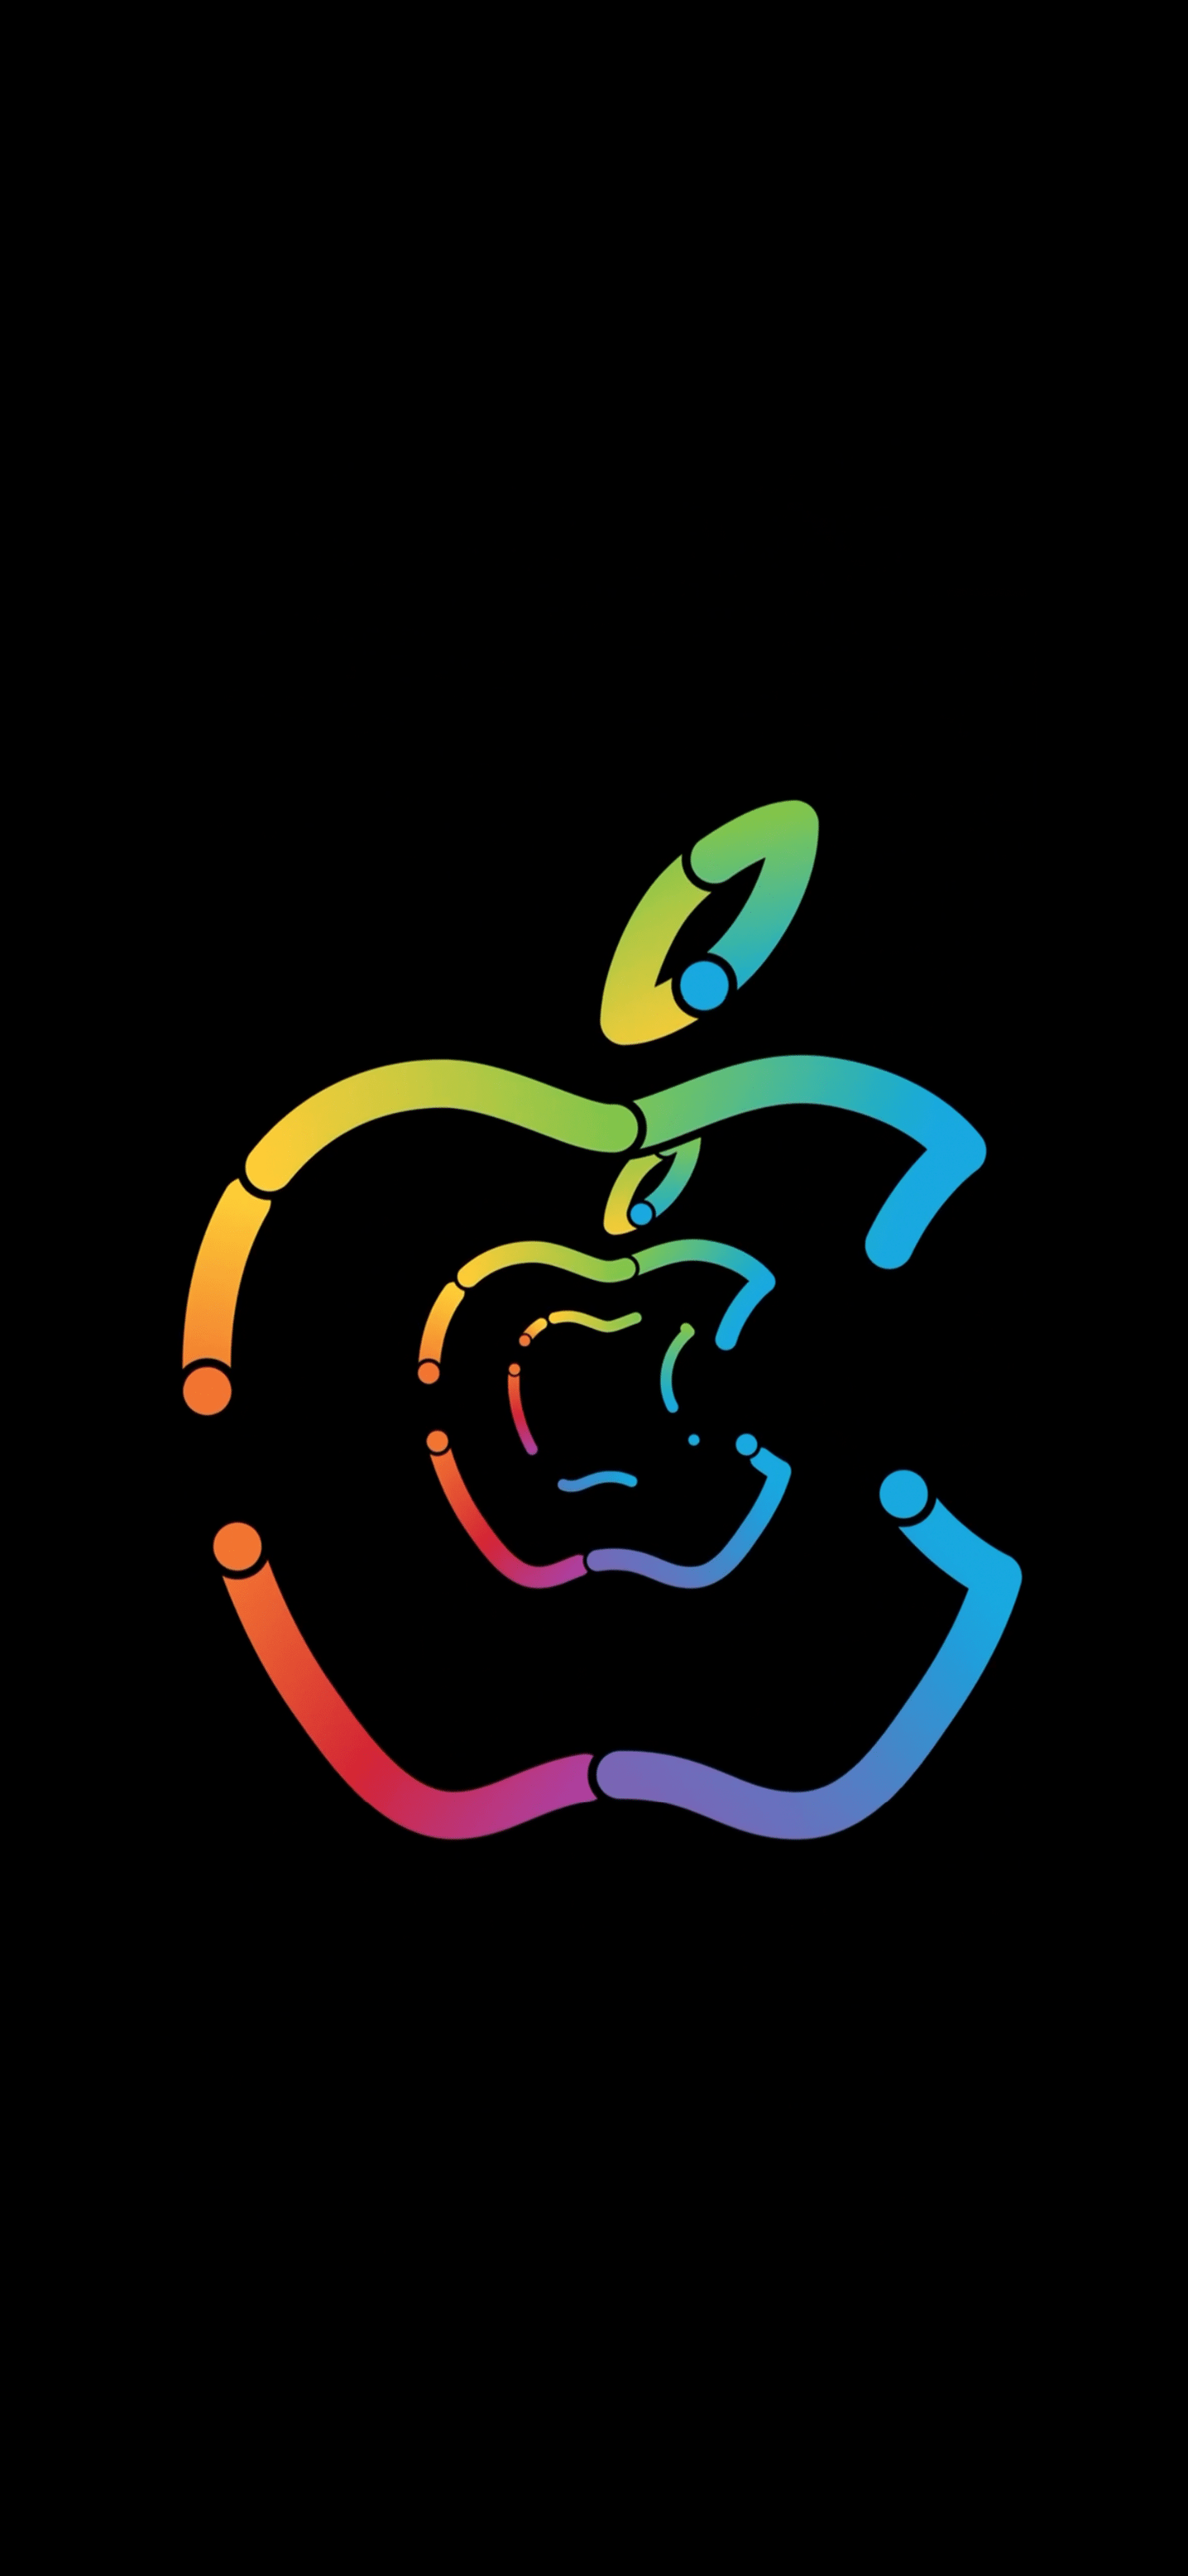 Cool Apple Logo Iphone Wallpapers Top Free Cool Apple Logo Iphone Backgrounds Wallpaperaccess